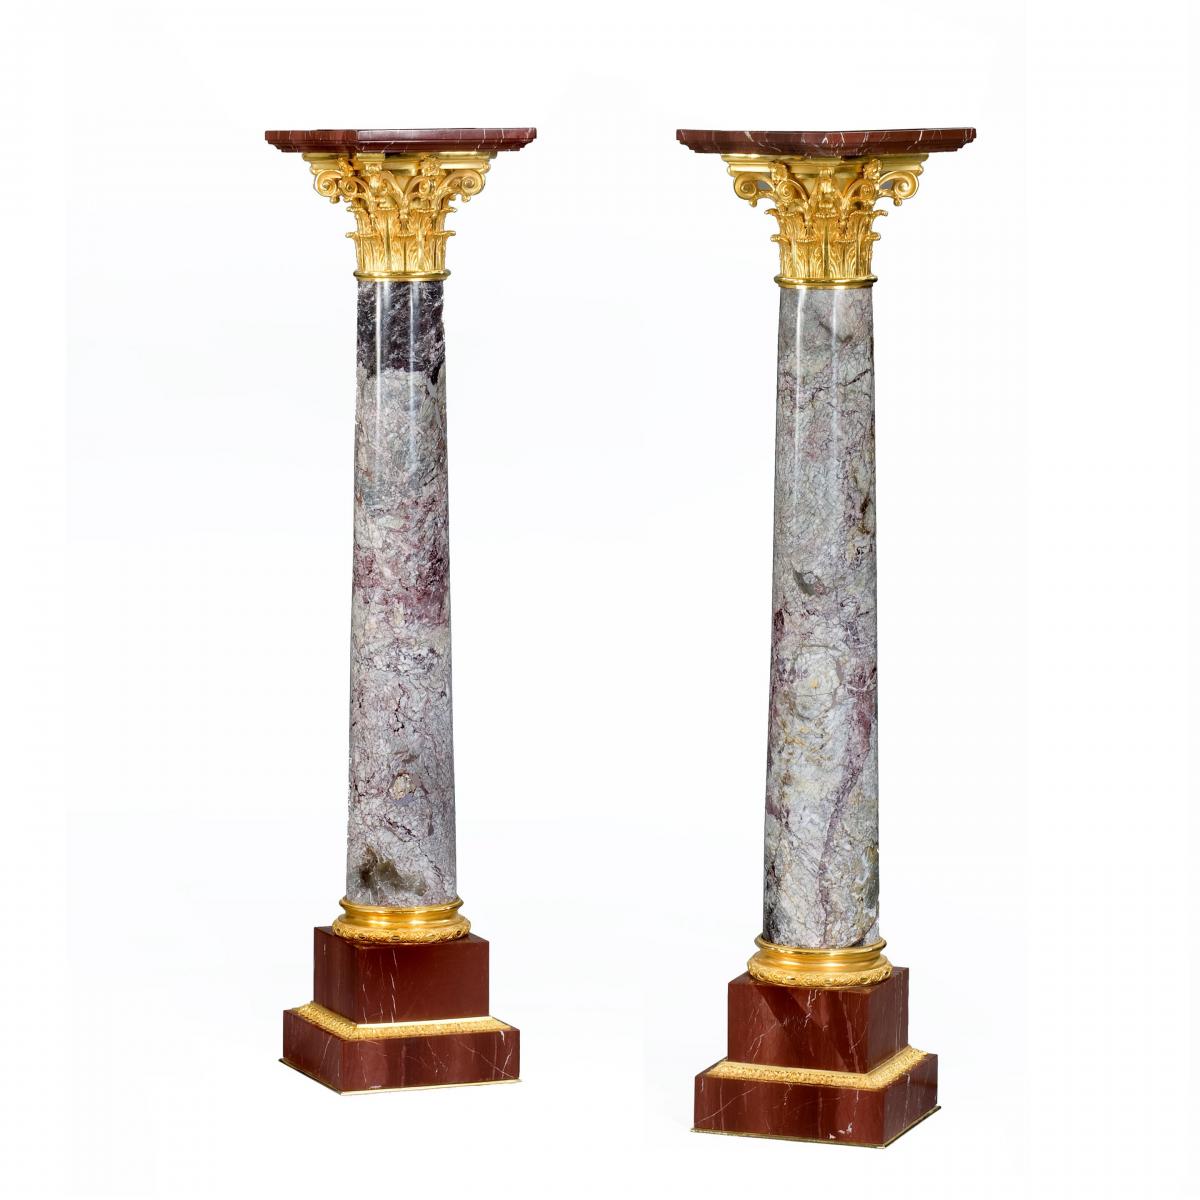 A very fine pair of antique Napoleon III marble classical columns